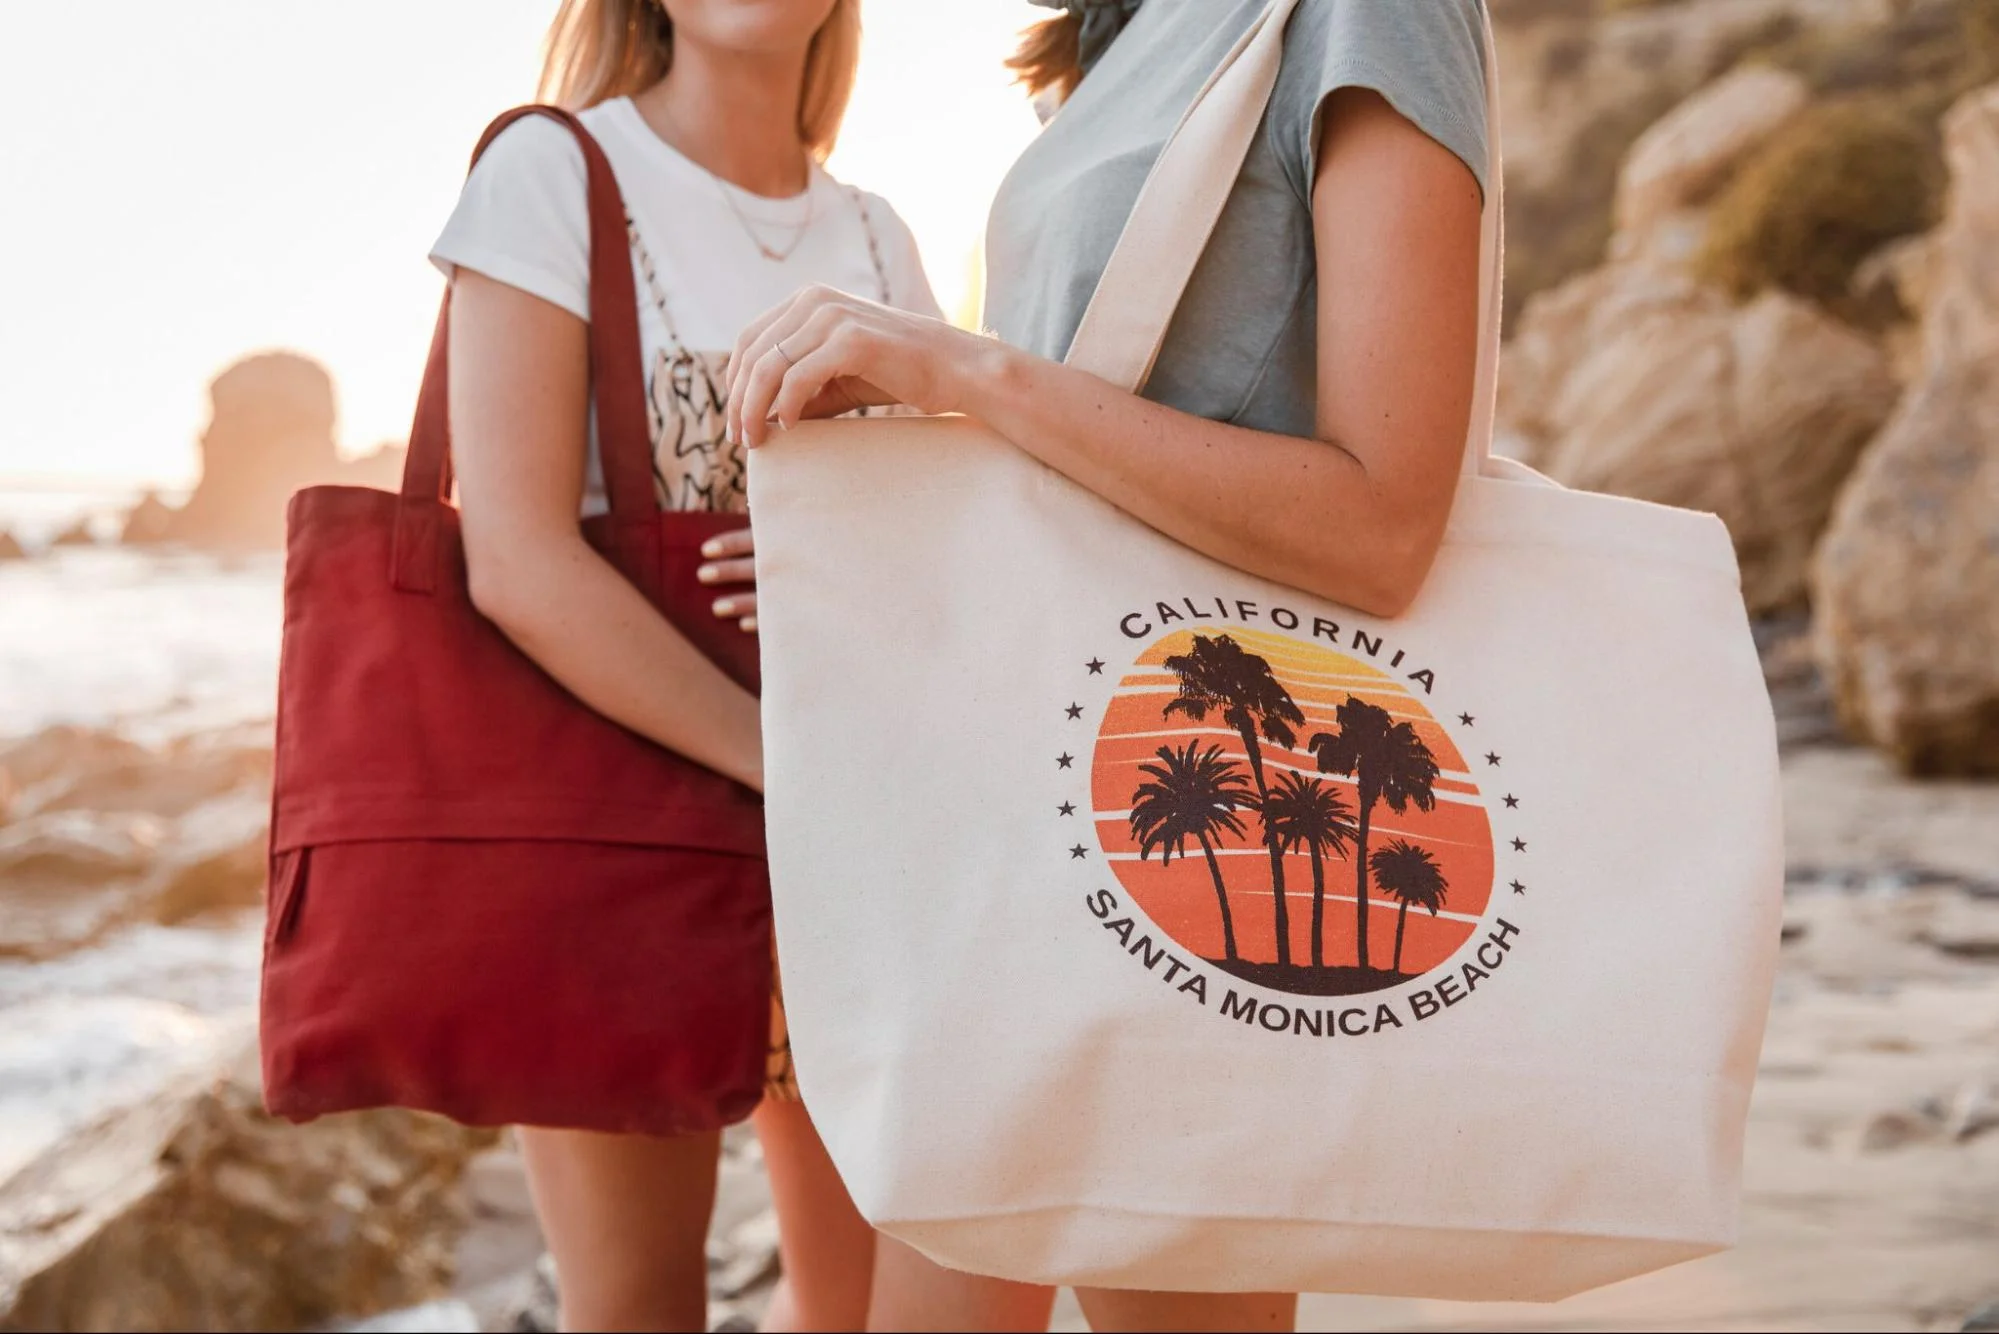 Eco-friendly organic cotton tote bags are sustainable carrying solutions